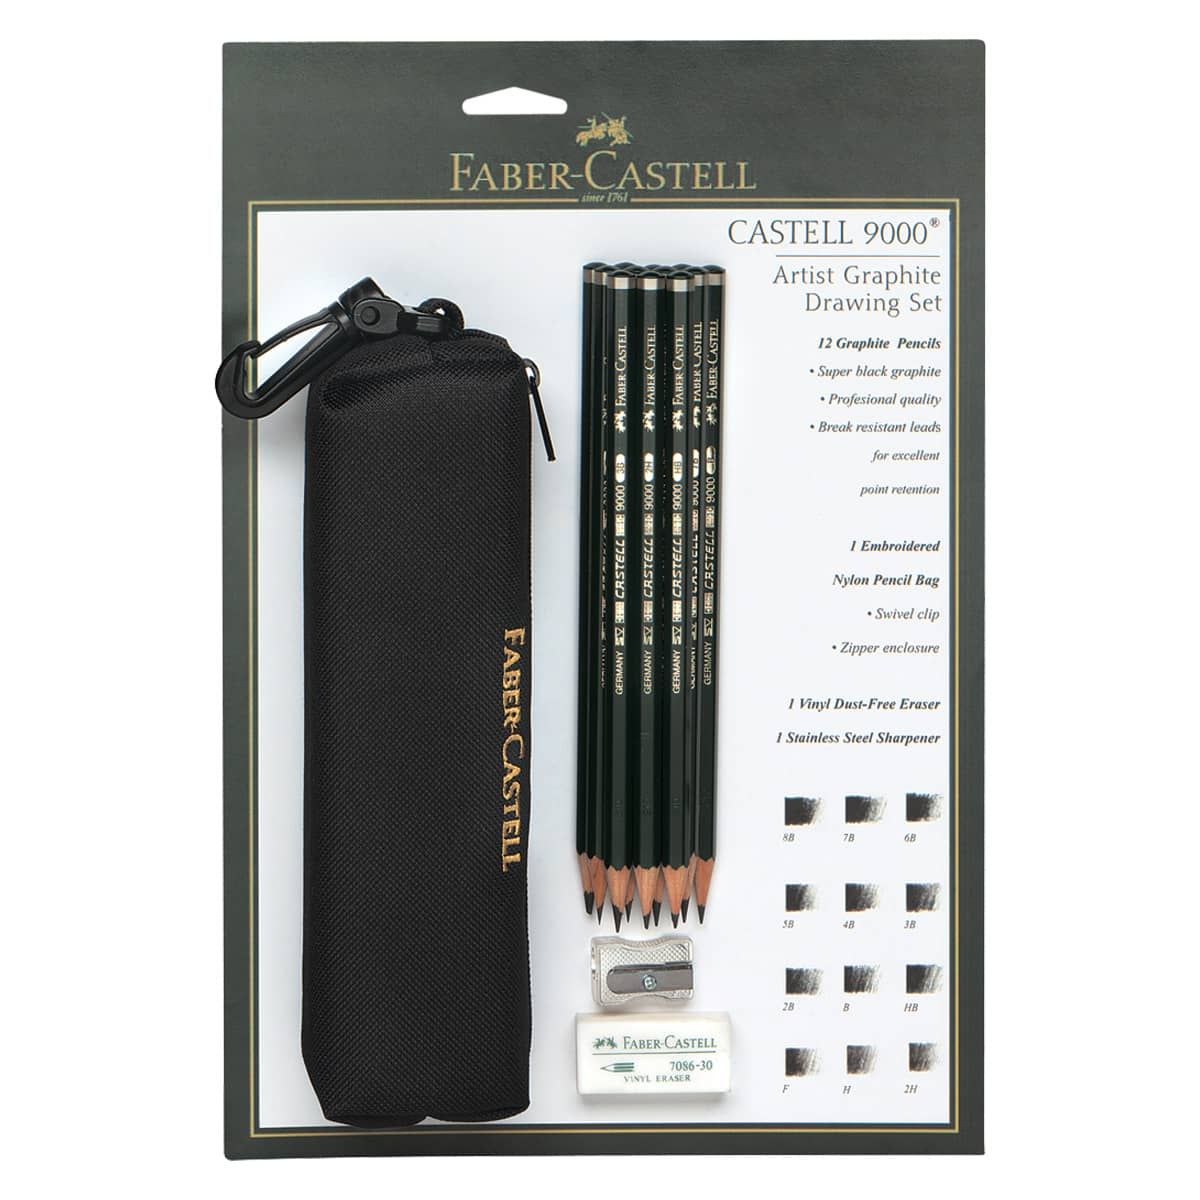 Professional Drawing Sketching Pencil Set - 12 Pieces Art Drawing Graphite  Pencils(2H-8B), Ideal for Drawing Art, Sketching, Shading, for Beginners 